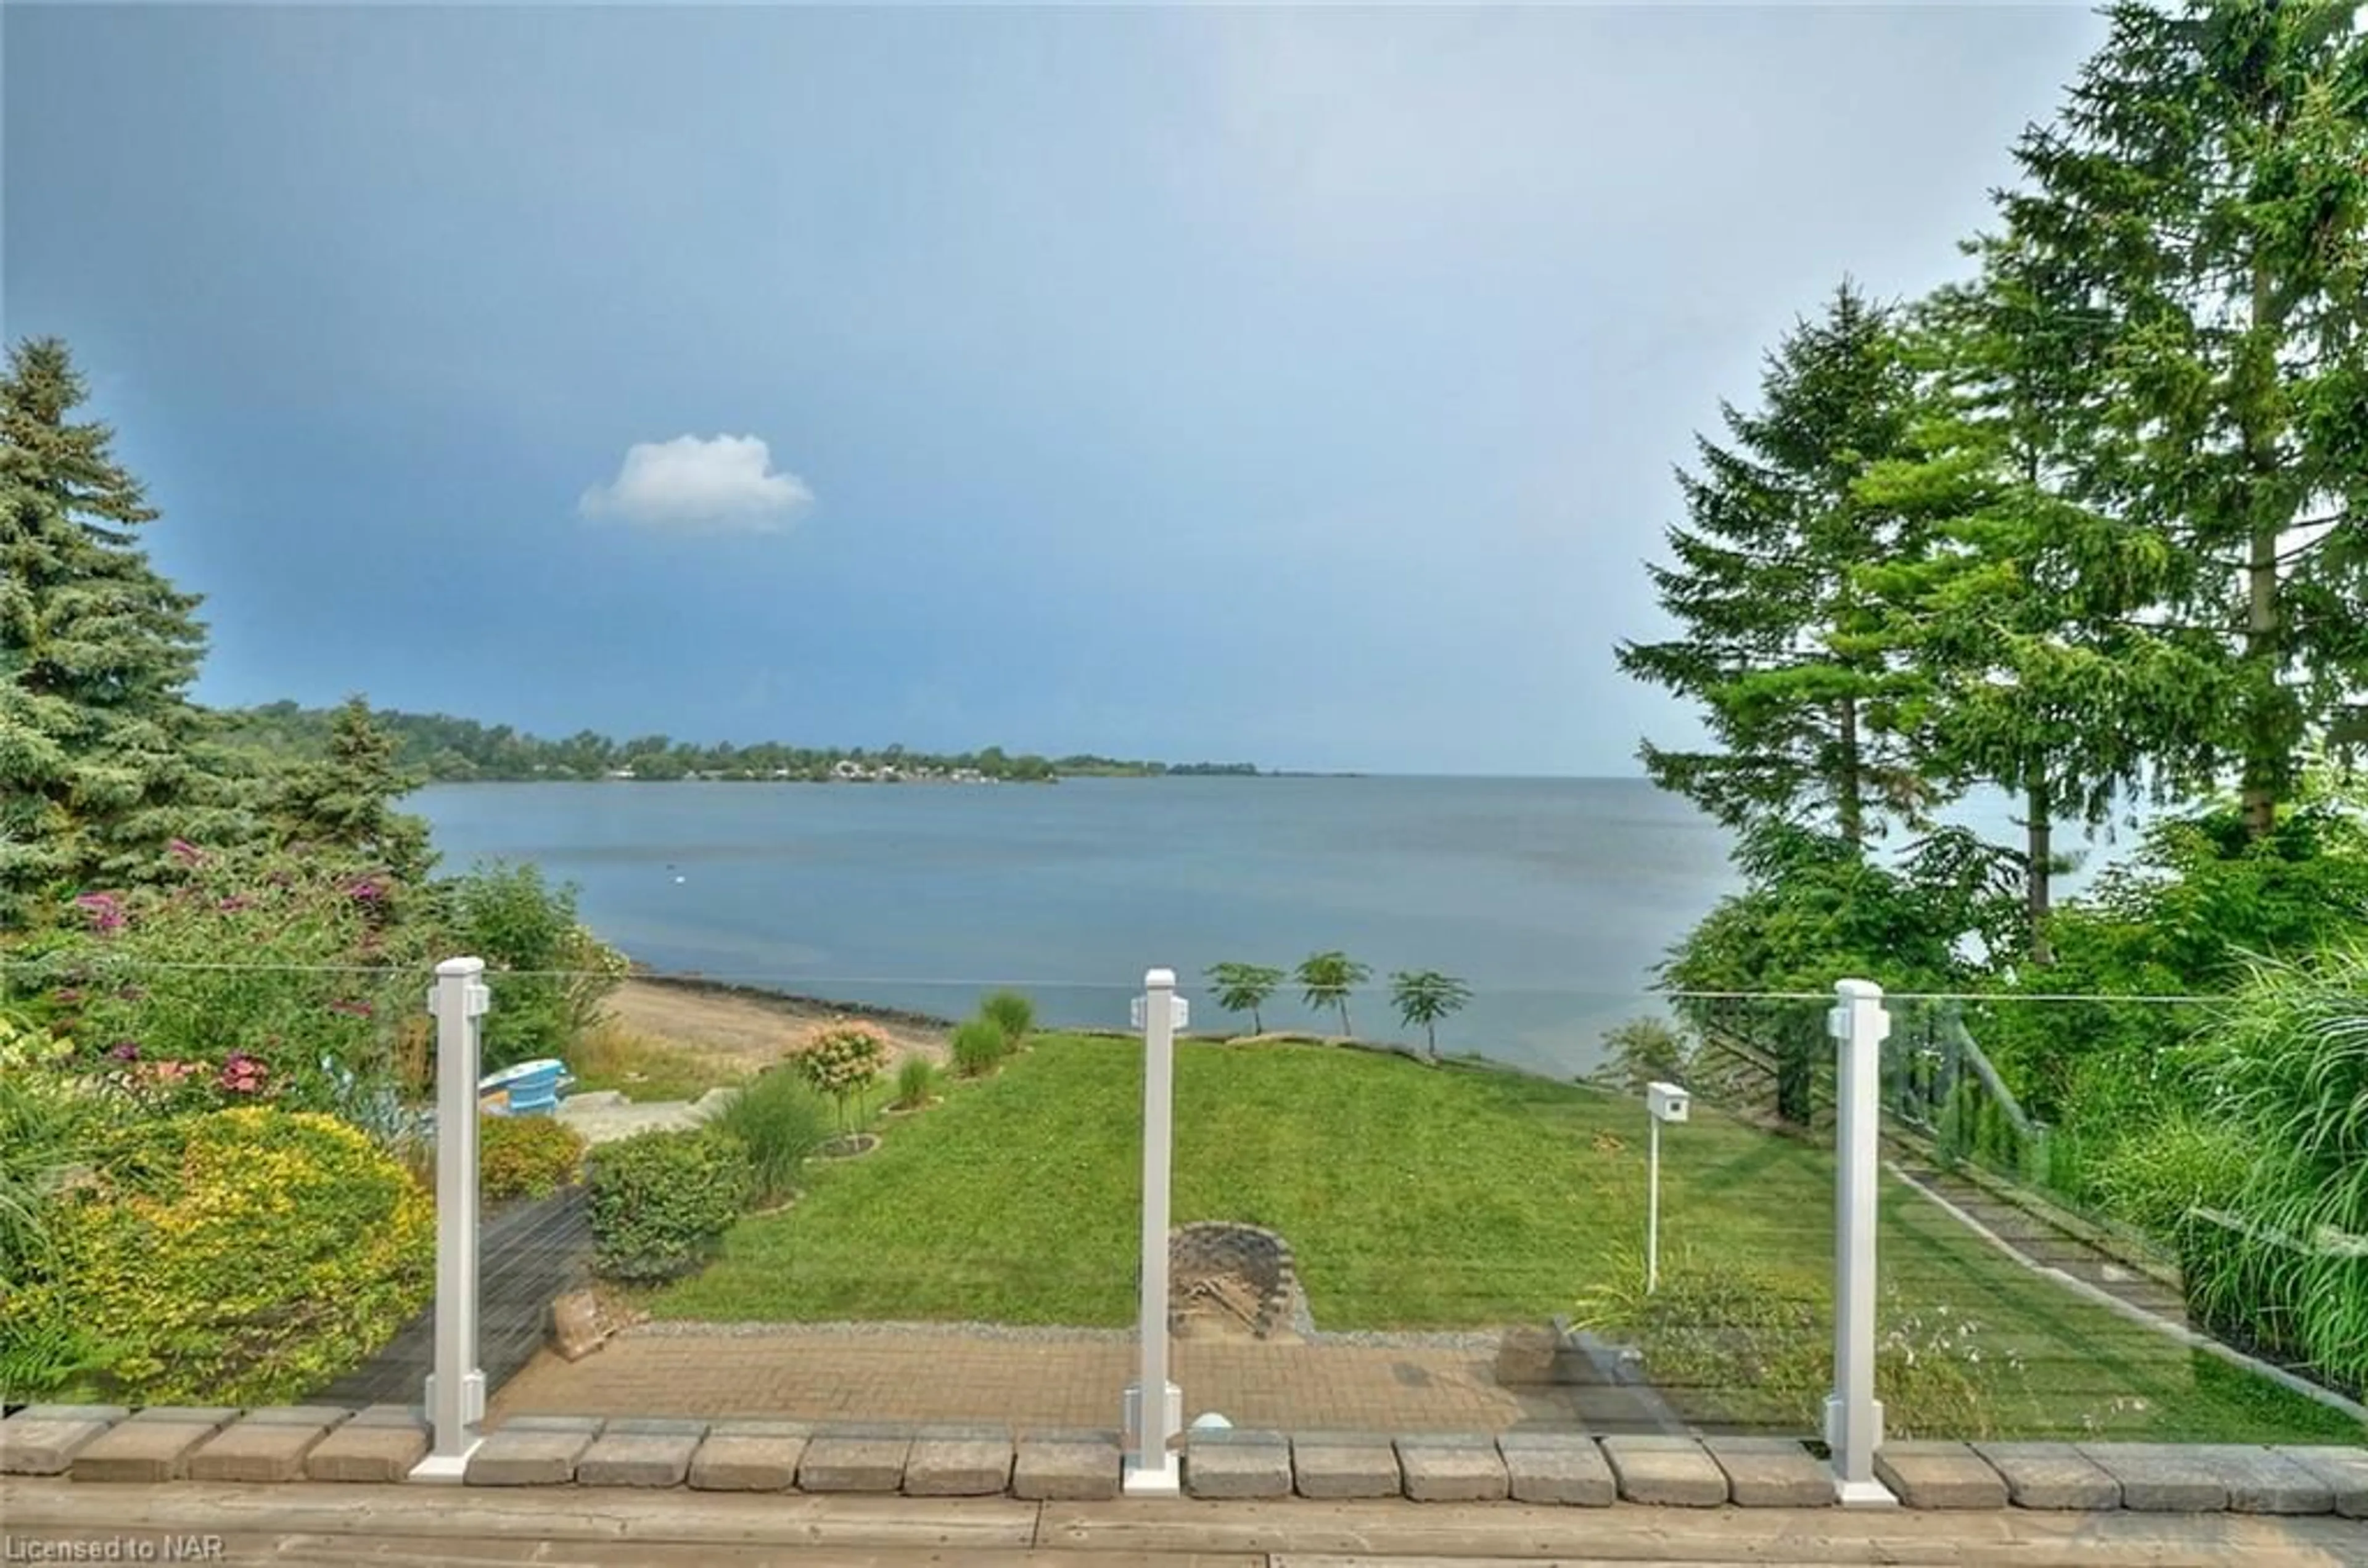 Lakeview for 39 Lakeside Dr, St. Catharines Ontario L2M 1P3